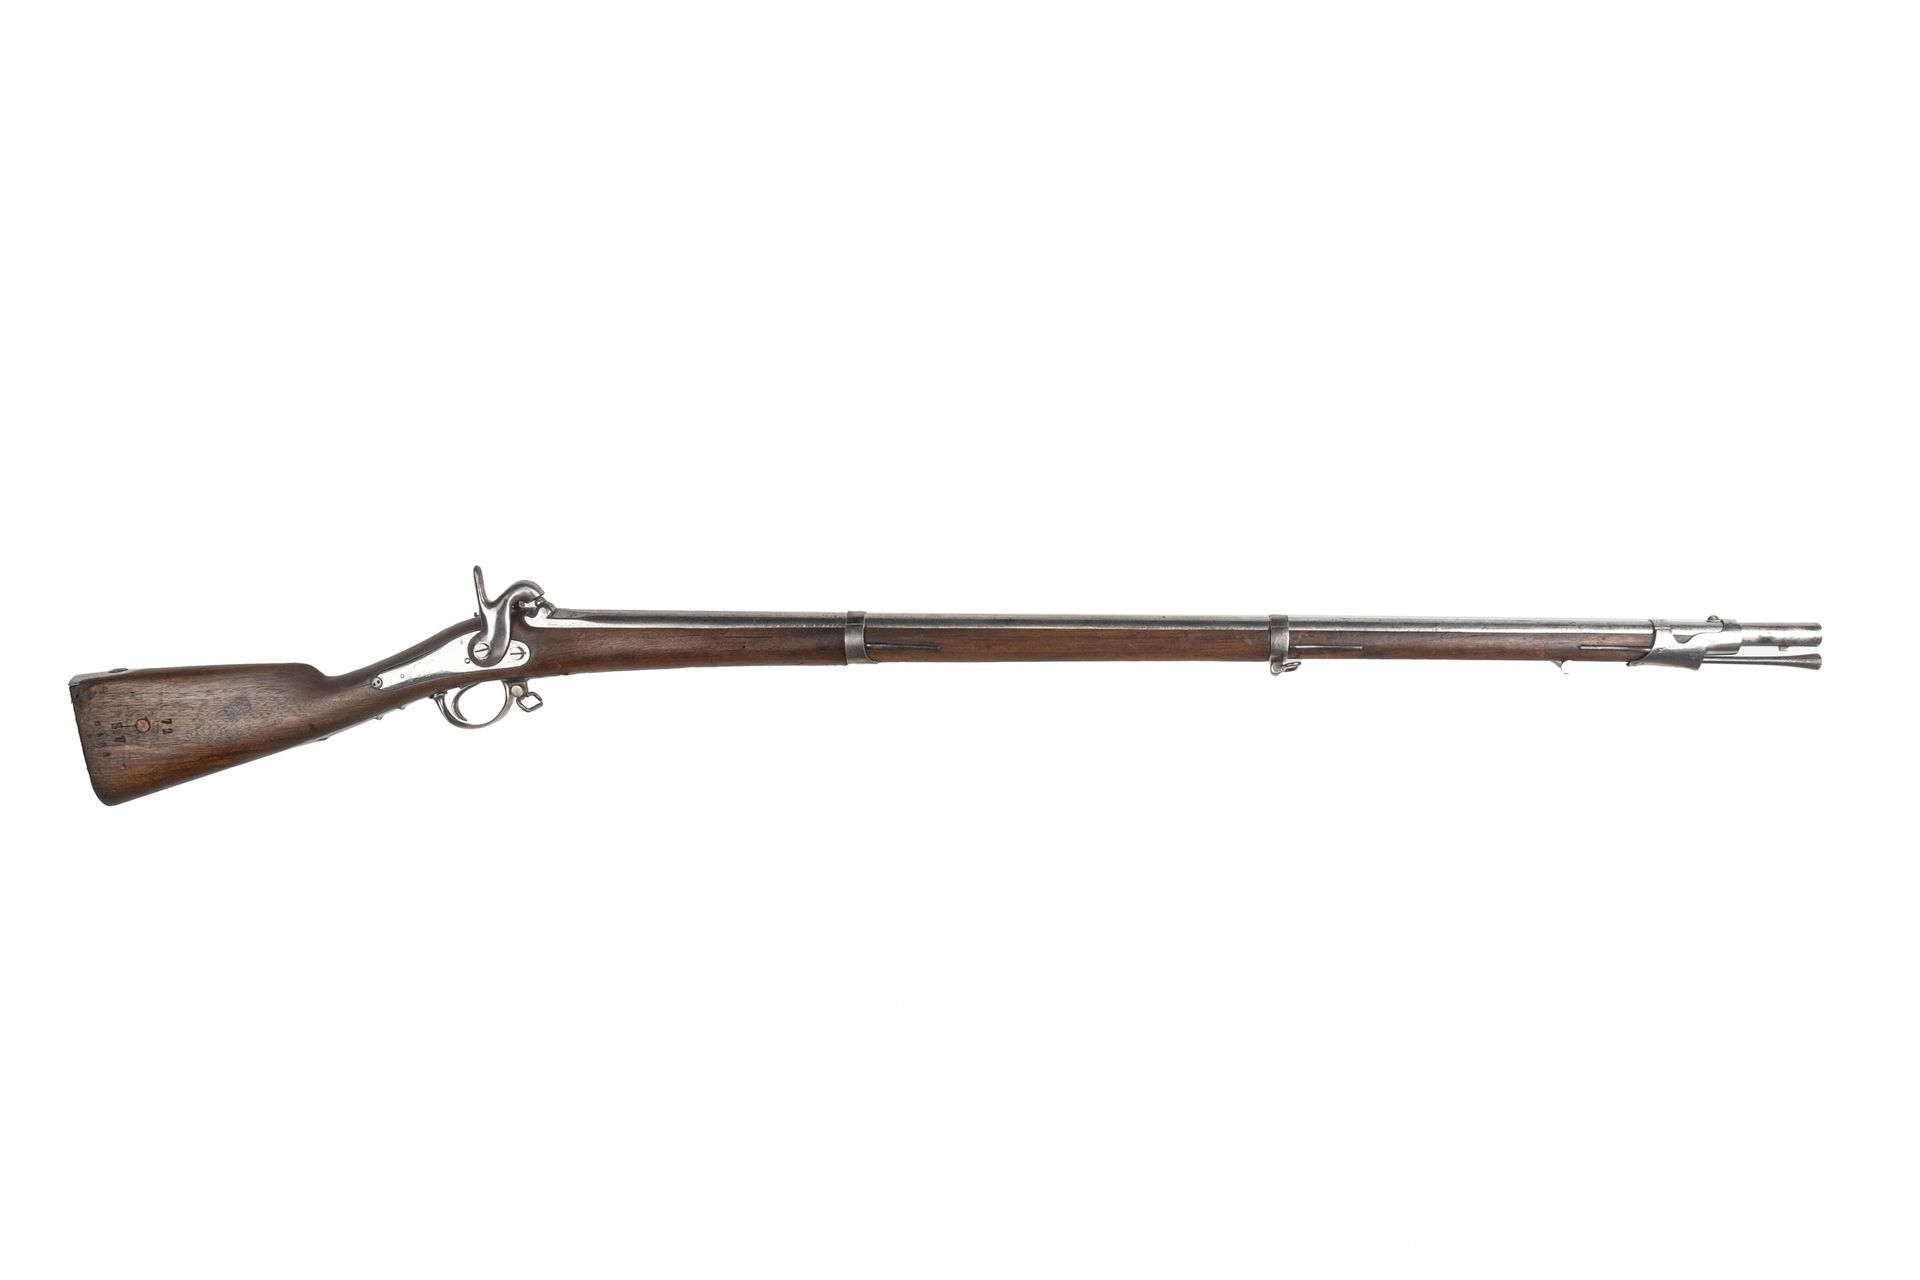 Null Grenadier percussion rifle model 1842. 

Round barrel with thunderbolt, wit&hellip;